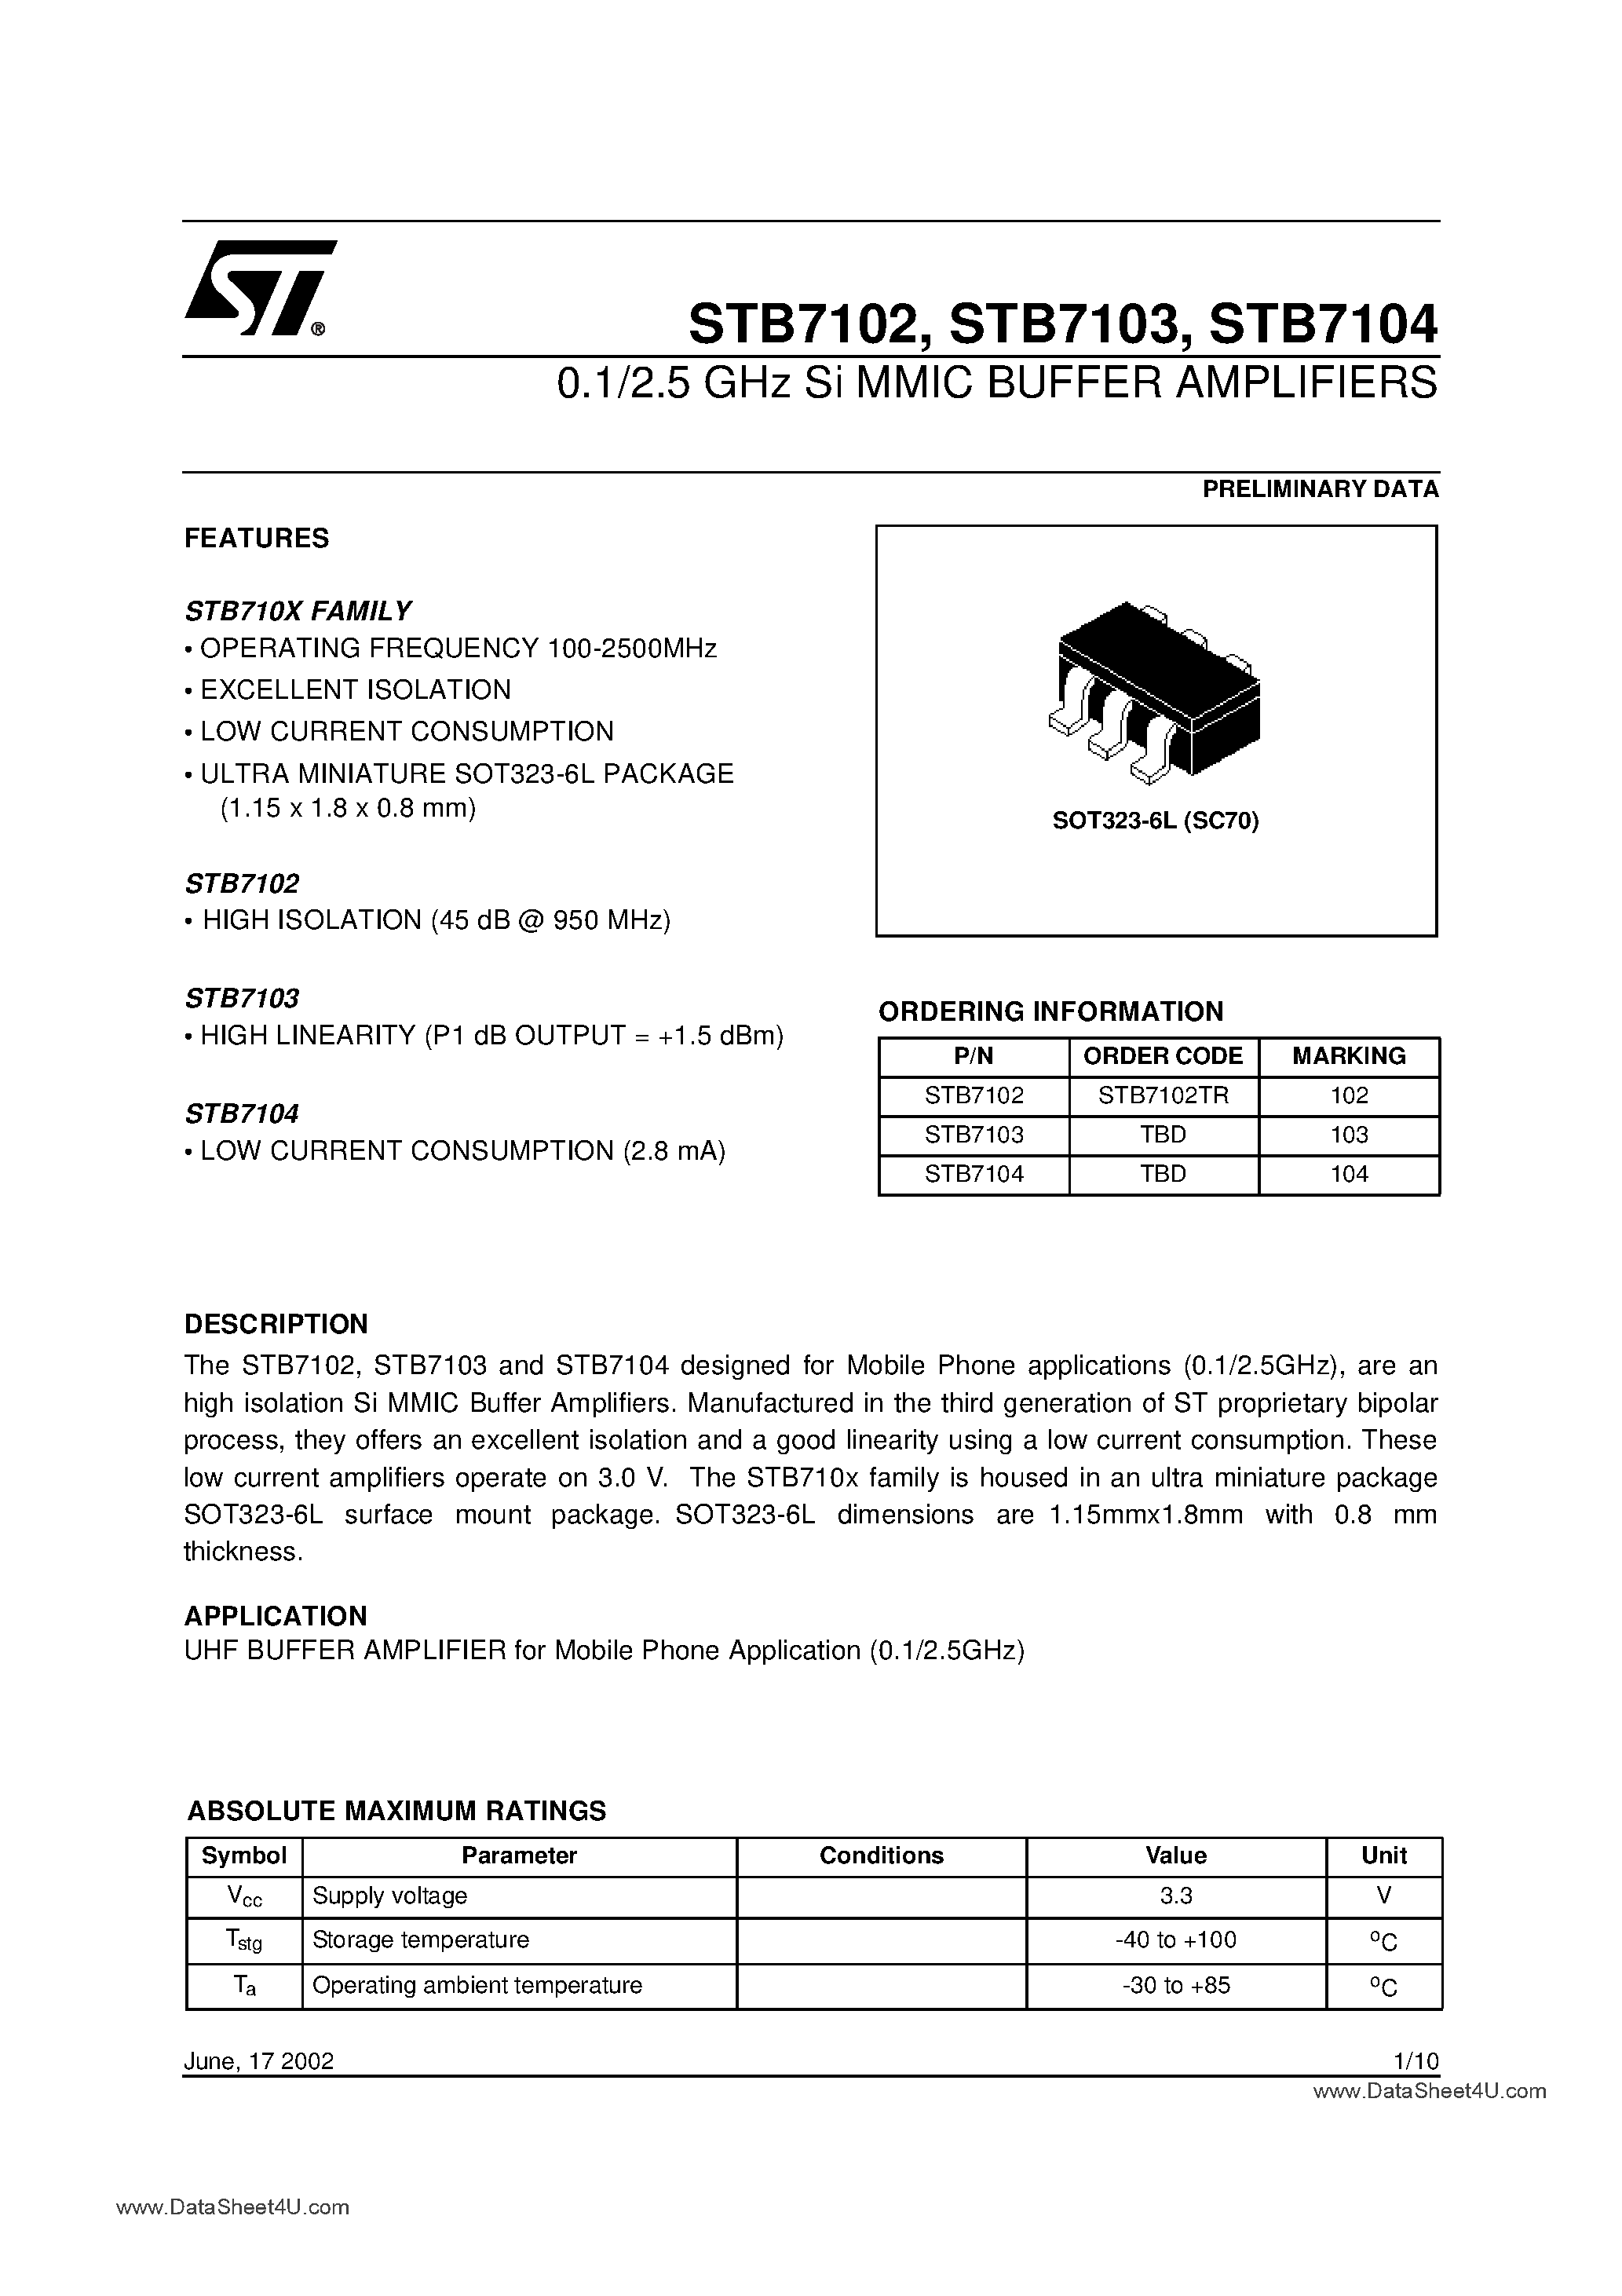 Datasheet STB7102 - (STB7102 - STB7104) 0.1/2.5 GHz Si MMIC BUFFER AMPLIFIERS page 1